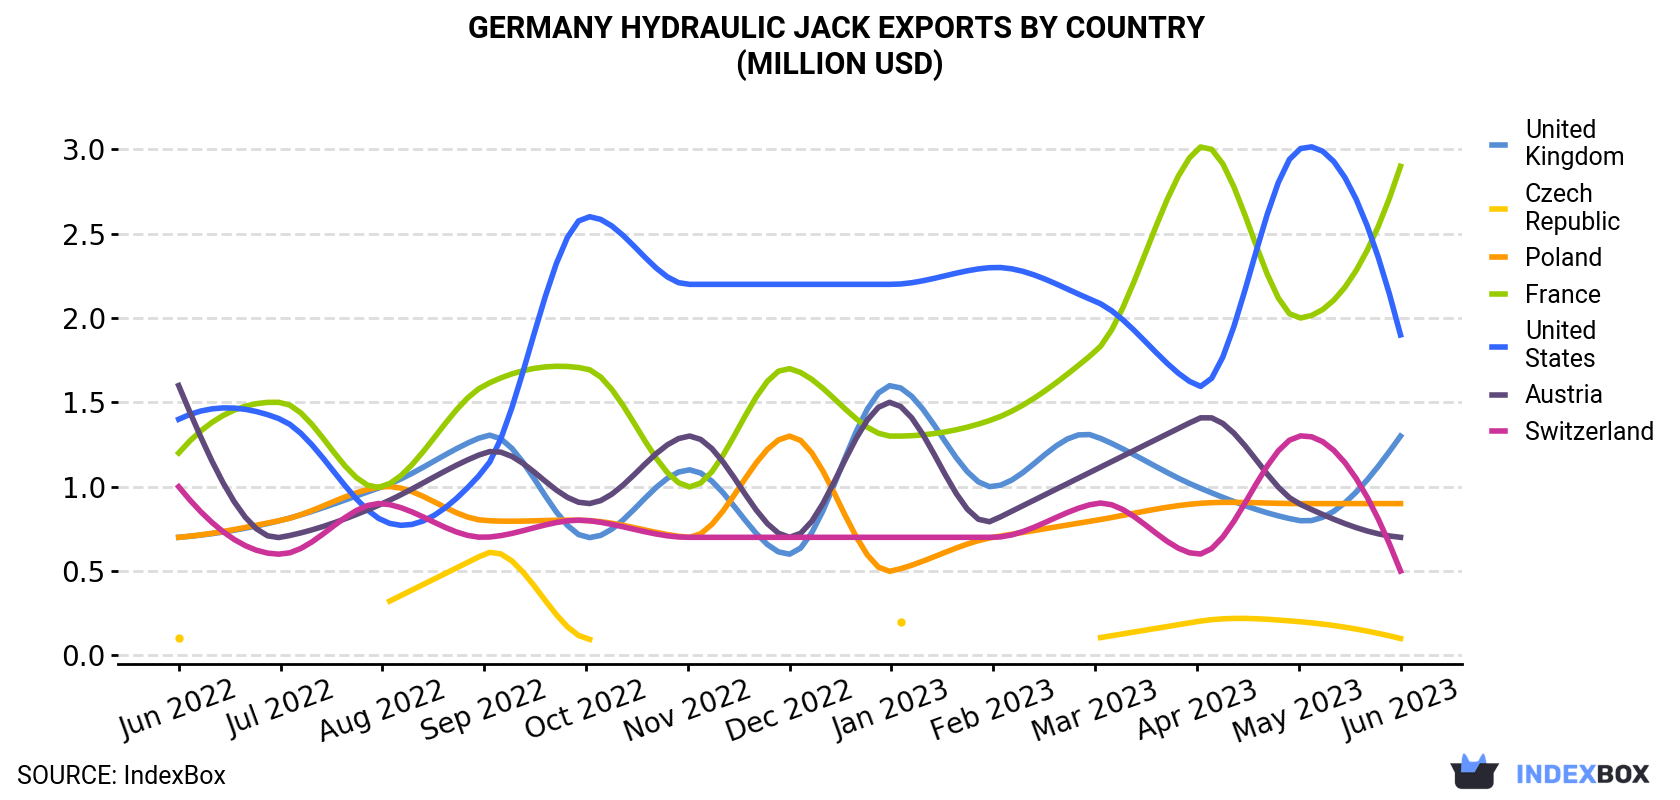 Germany Hydraulic Jack Exports By Country (Million USD)